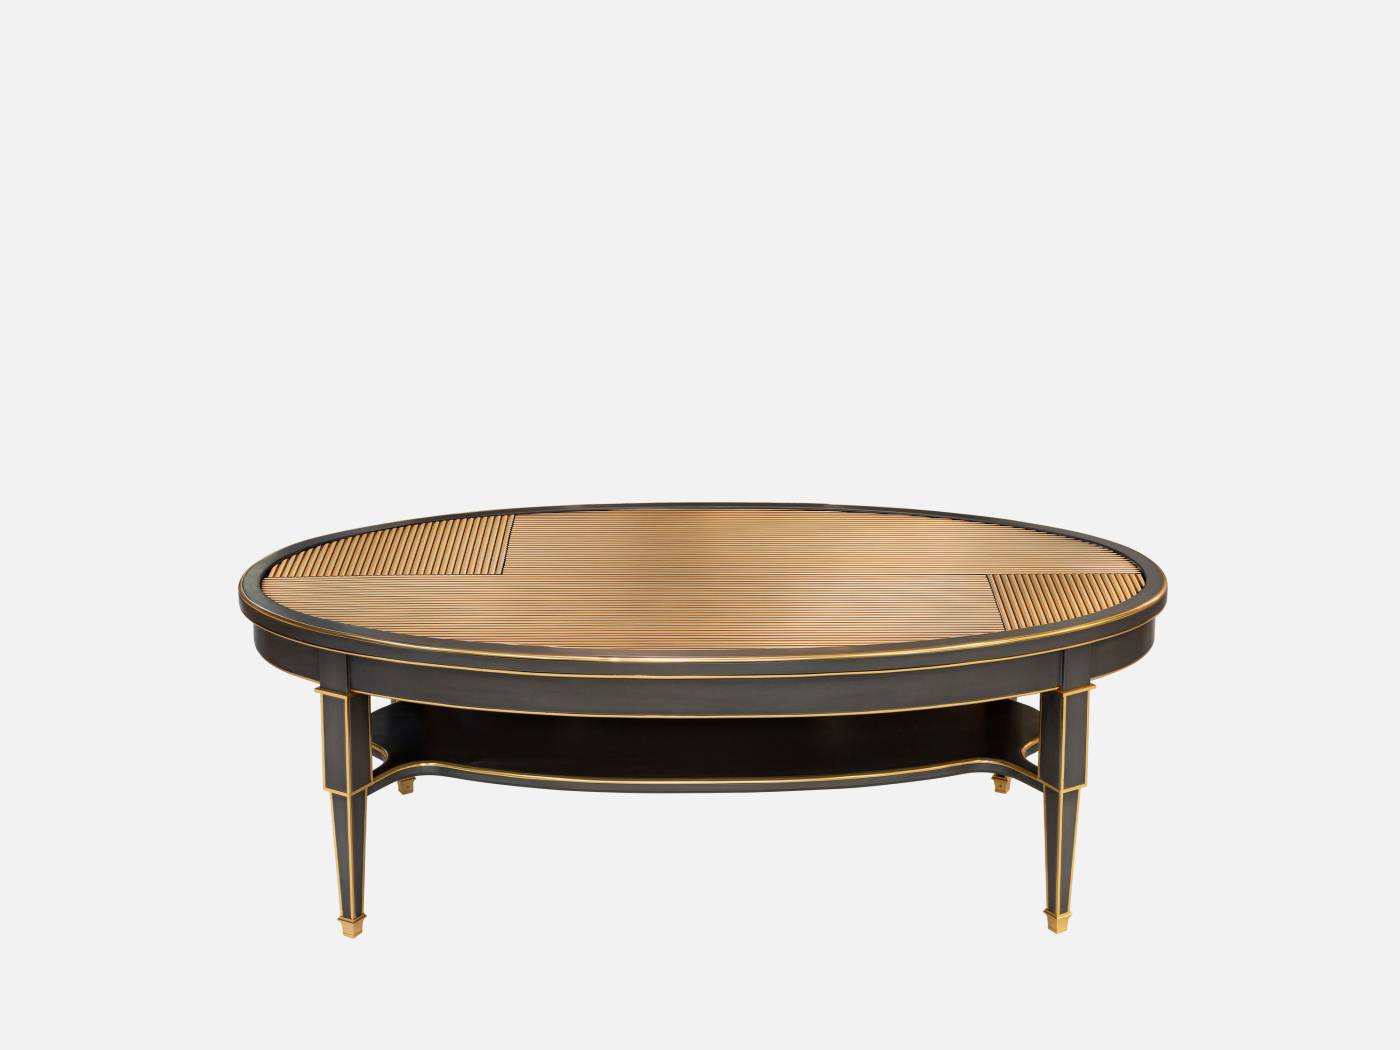 ART. 2219-1 – The elegance of luxury classic Small tables made in Italy by C.G. Capelletti.